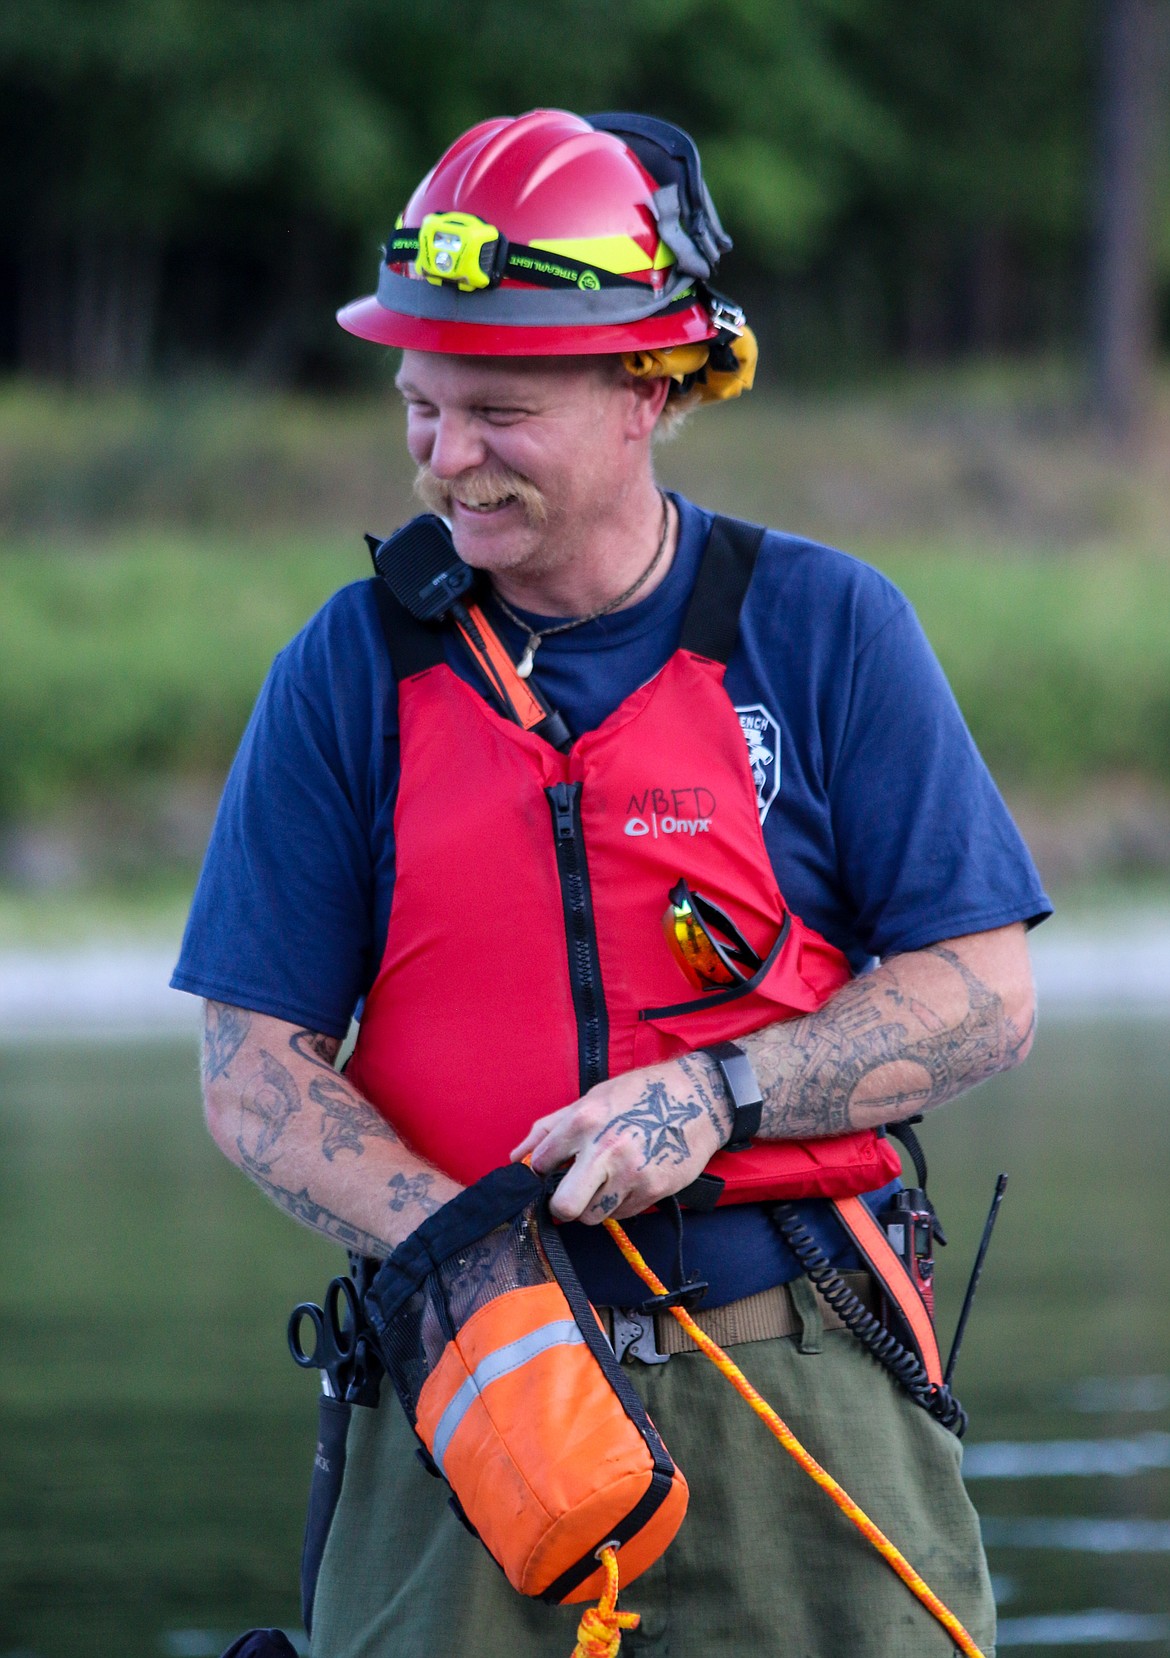 North Bench Firefighter Tom Chaney, known for always having a smile on his face, takes part in river rescue training.